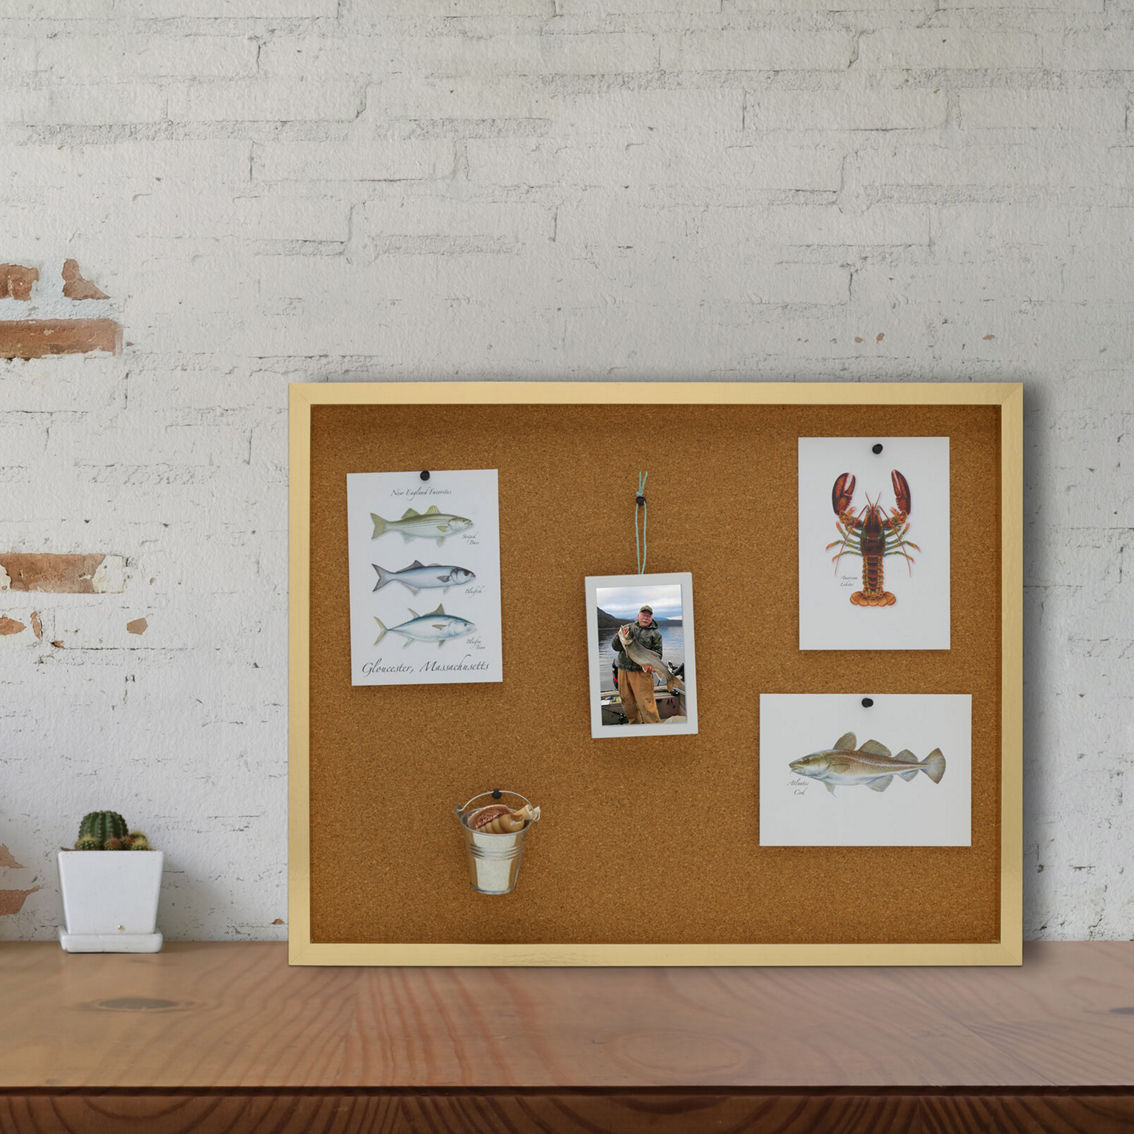 Mikasa Home 24 x 19 in. Cork Board with 5 Tacks - Image 3 of 3